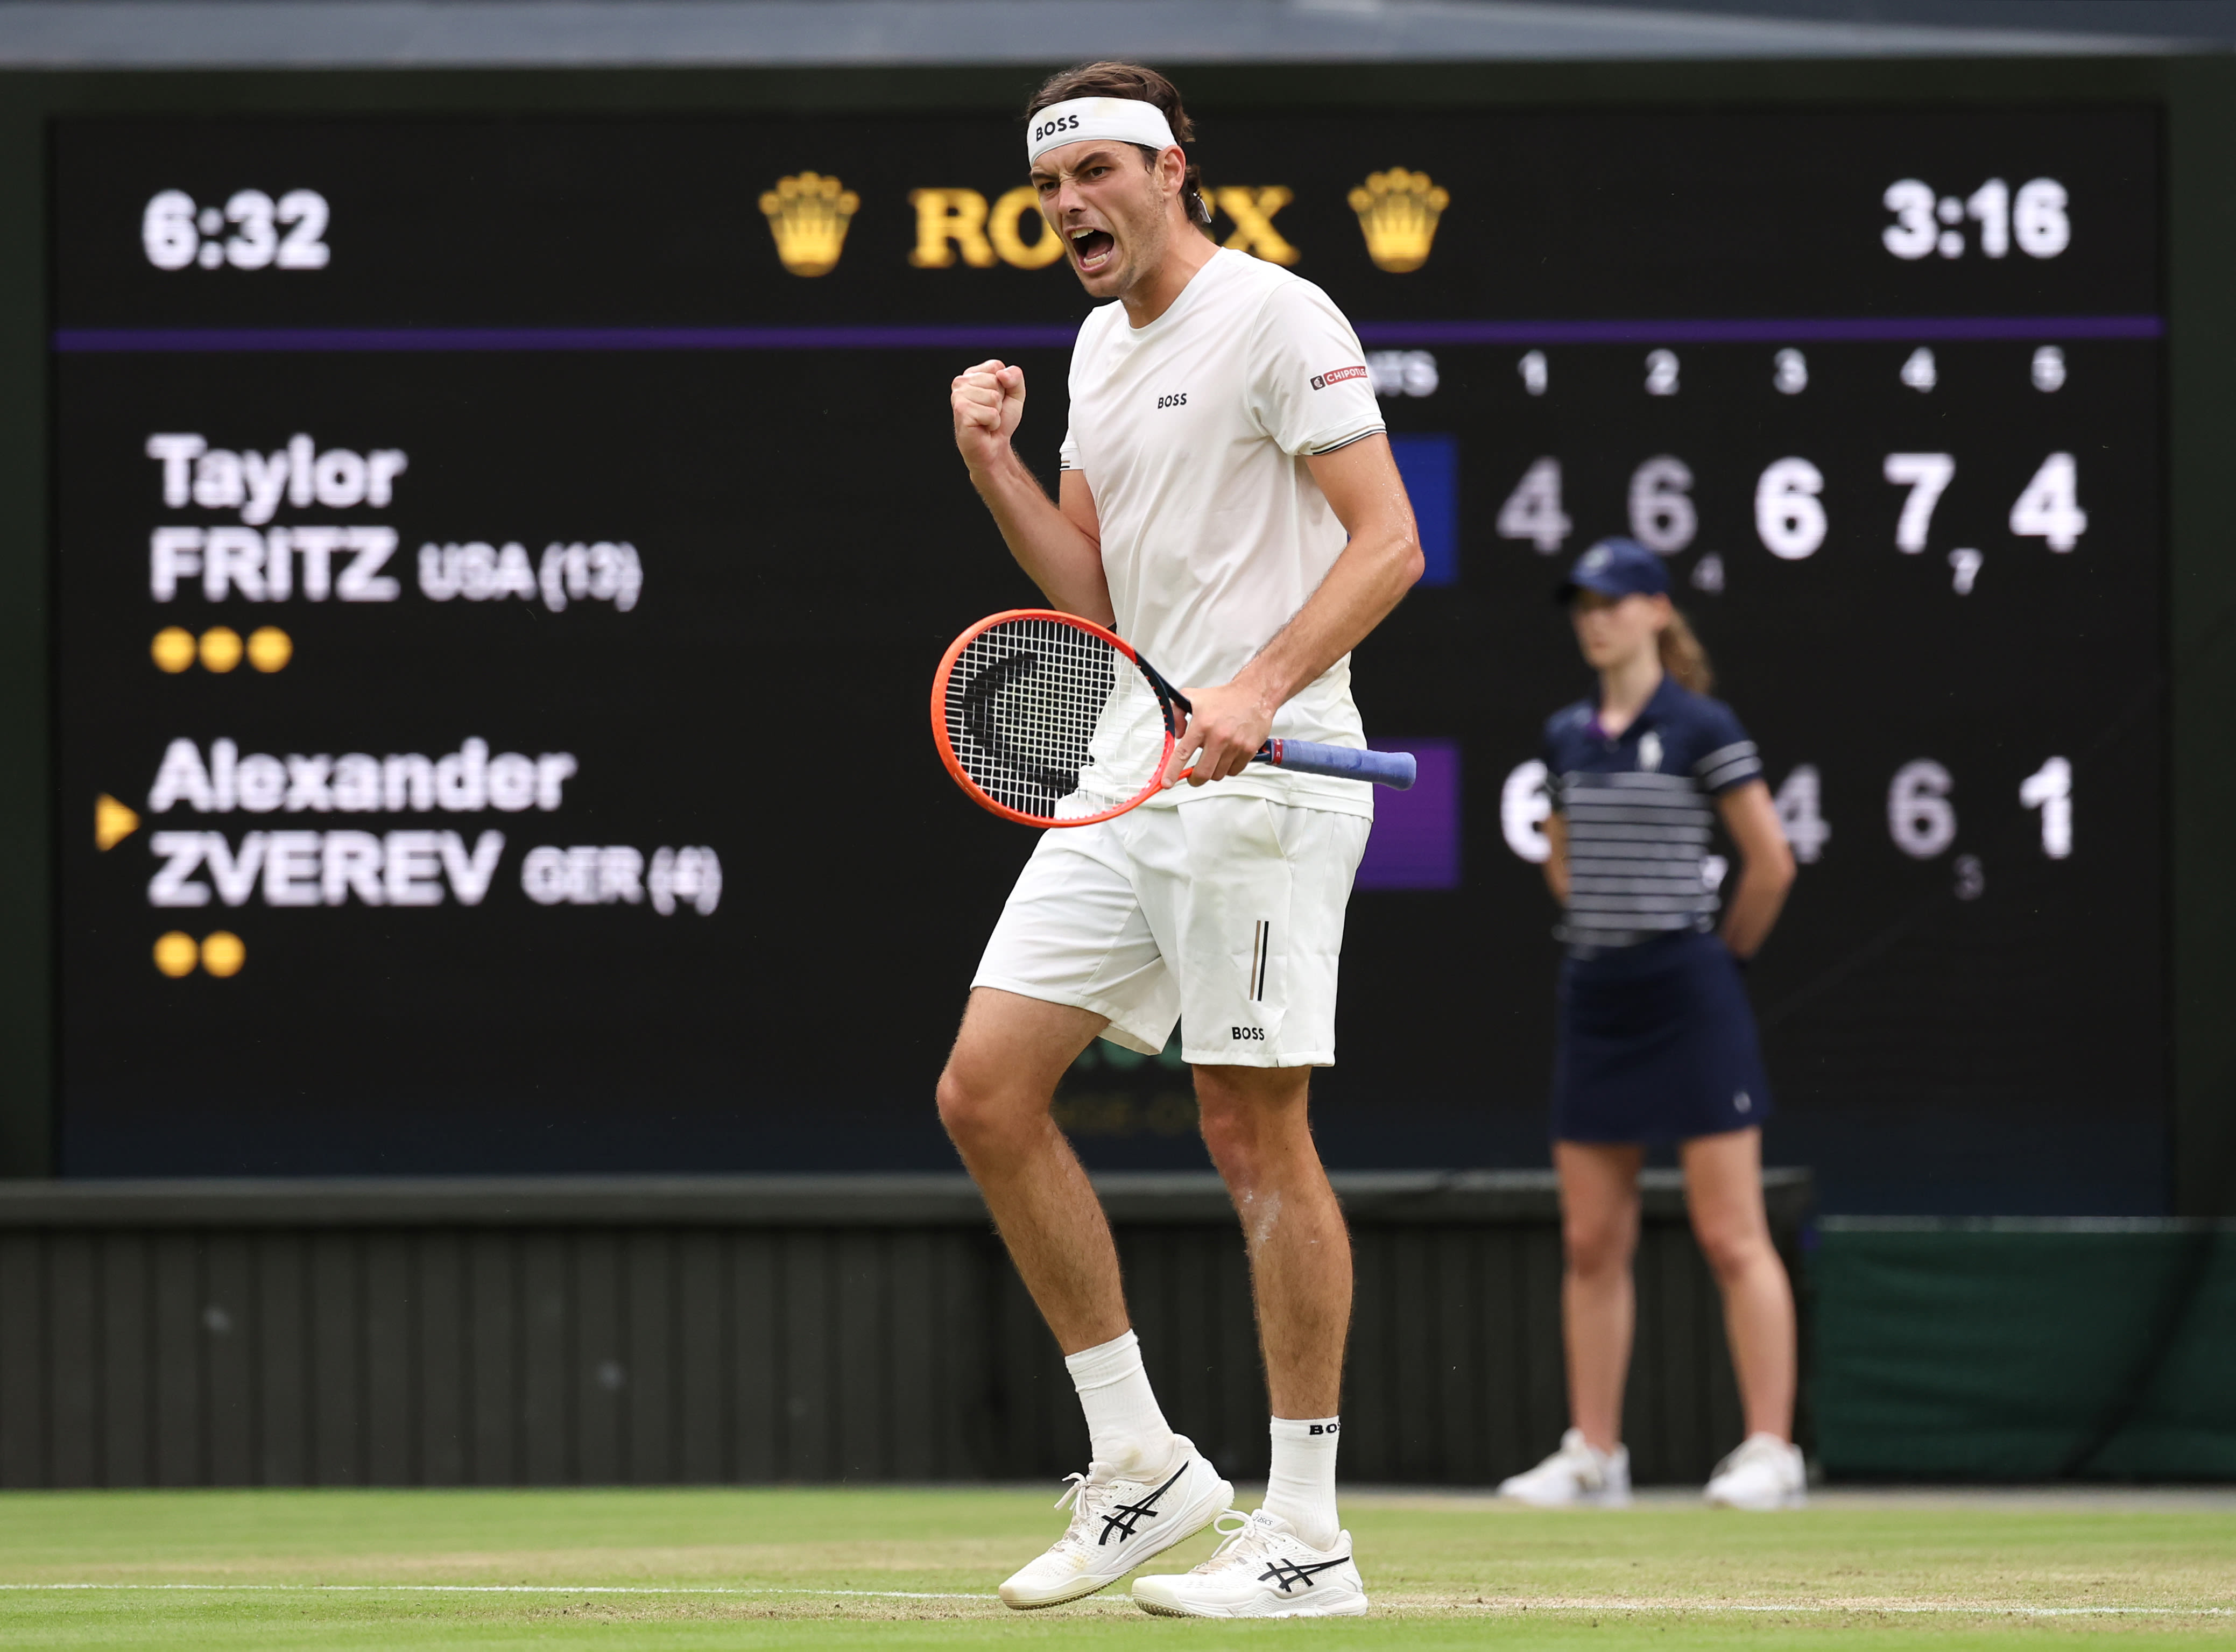 Wimbledon: Taylor Fritz rallies from 2 sets down to upset Alexander Zverev in 5 sets